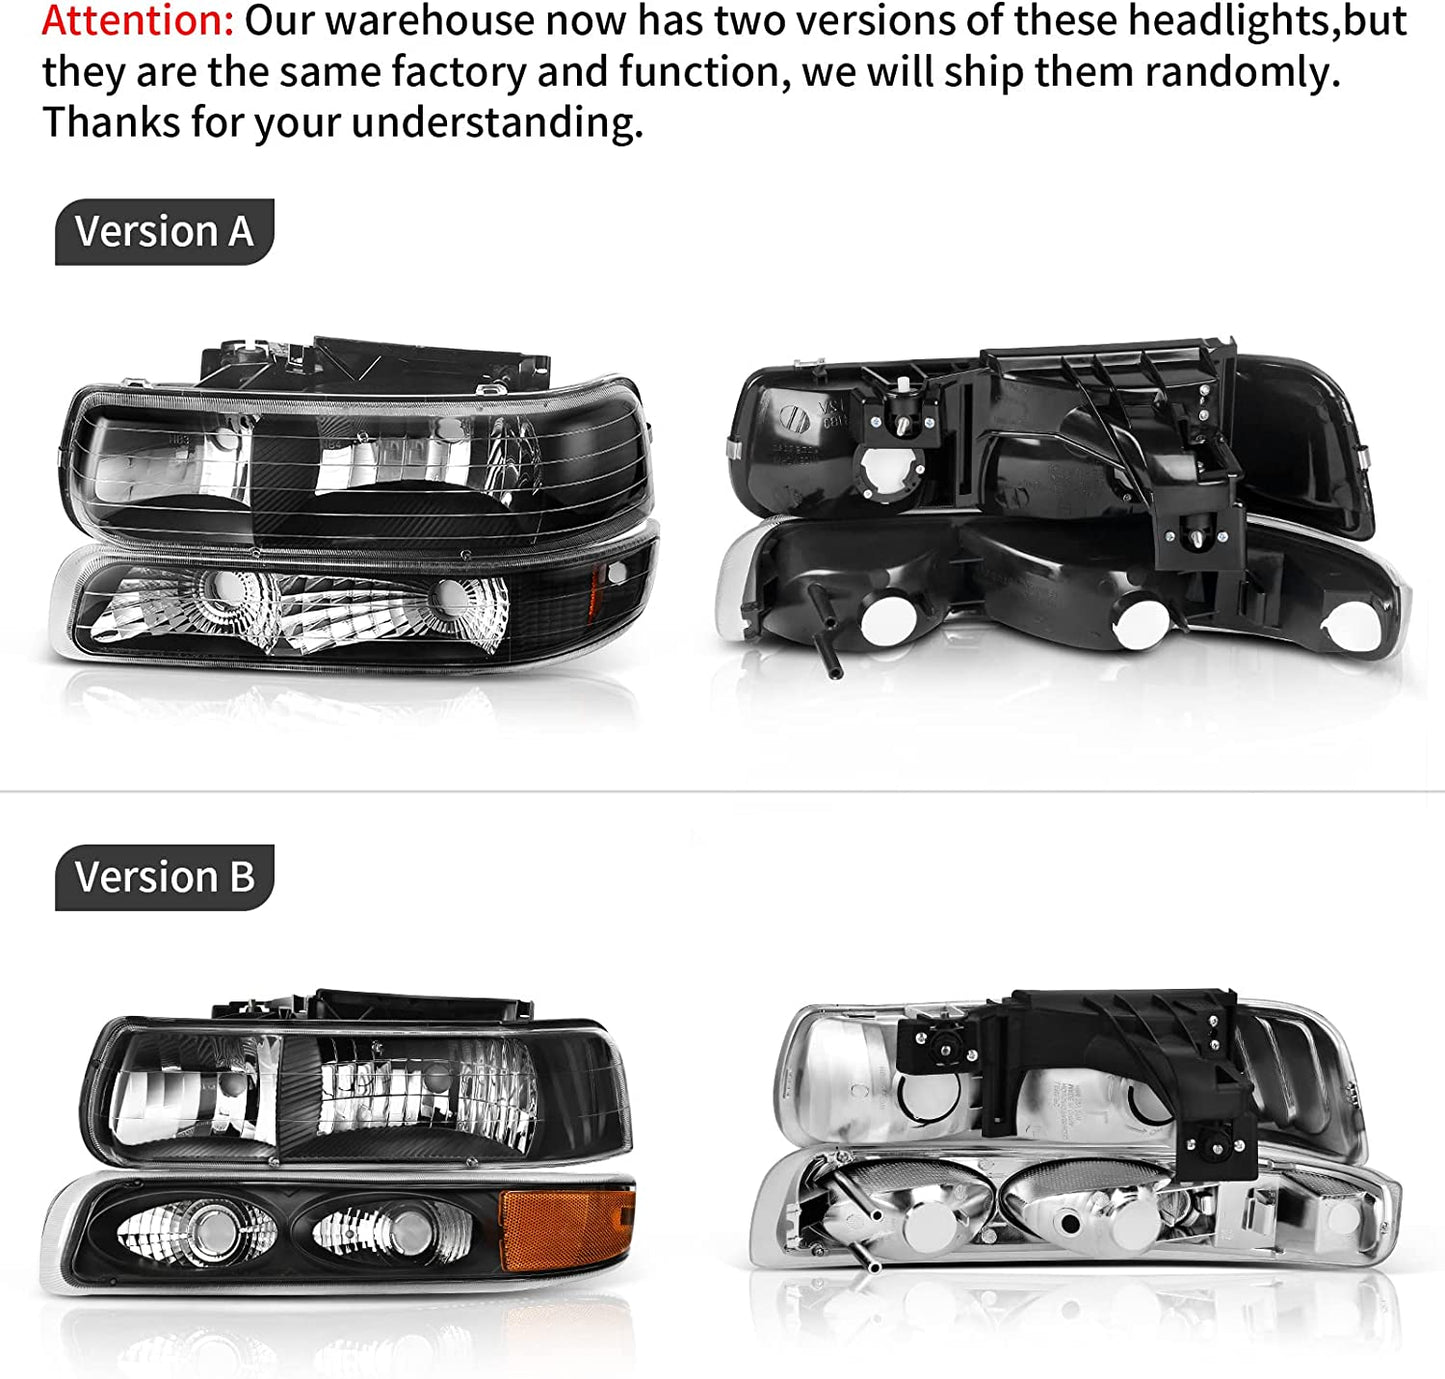 AUTOSAVER88 Headlights Assembly Compatible with 1999-2002 Chevy Silverado / 2001-2002 Chevy Silverado 1500 2500 / 2001-2002 Chevy Silverado 1500HD 2500HD 3500 / 2000-2006 Tahoe Suburban 1500 2500 with Lights in Bumpers